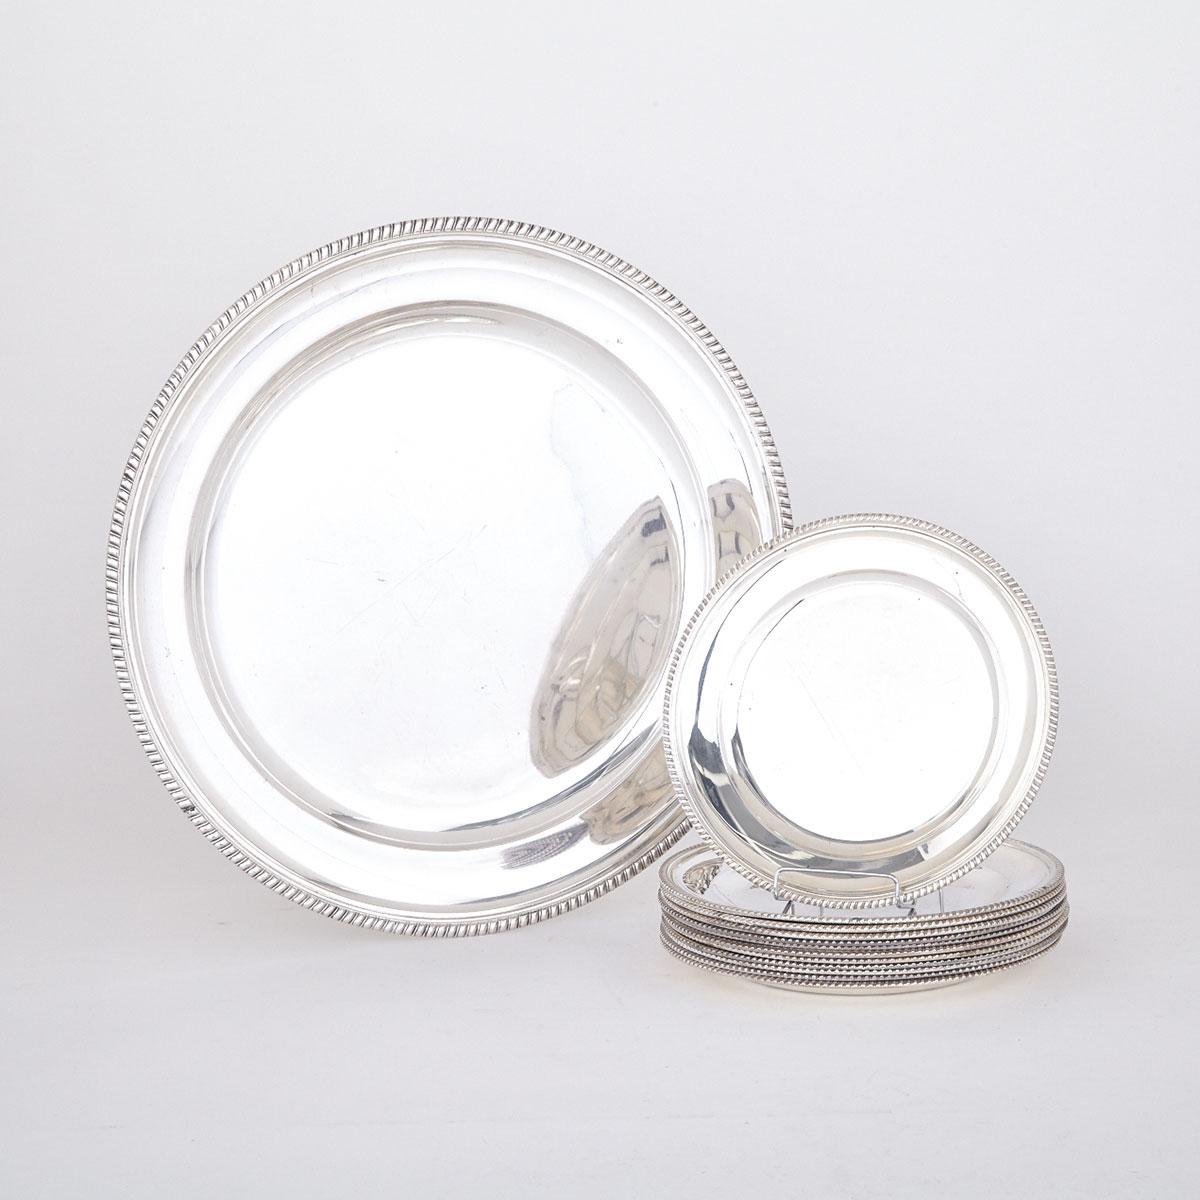 Twelve Italian Silver Plates and Serving Dish, Miracoli & Co, Milan, 20th Century